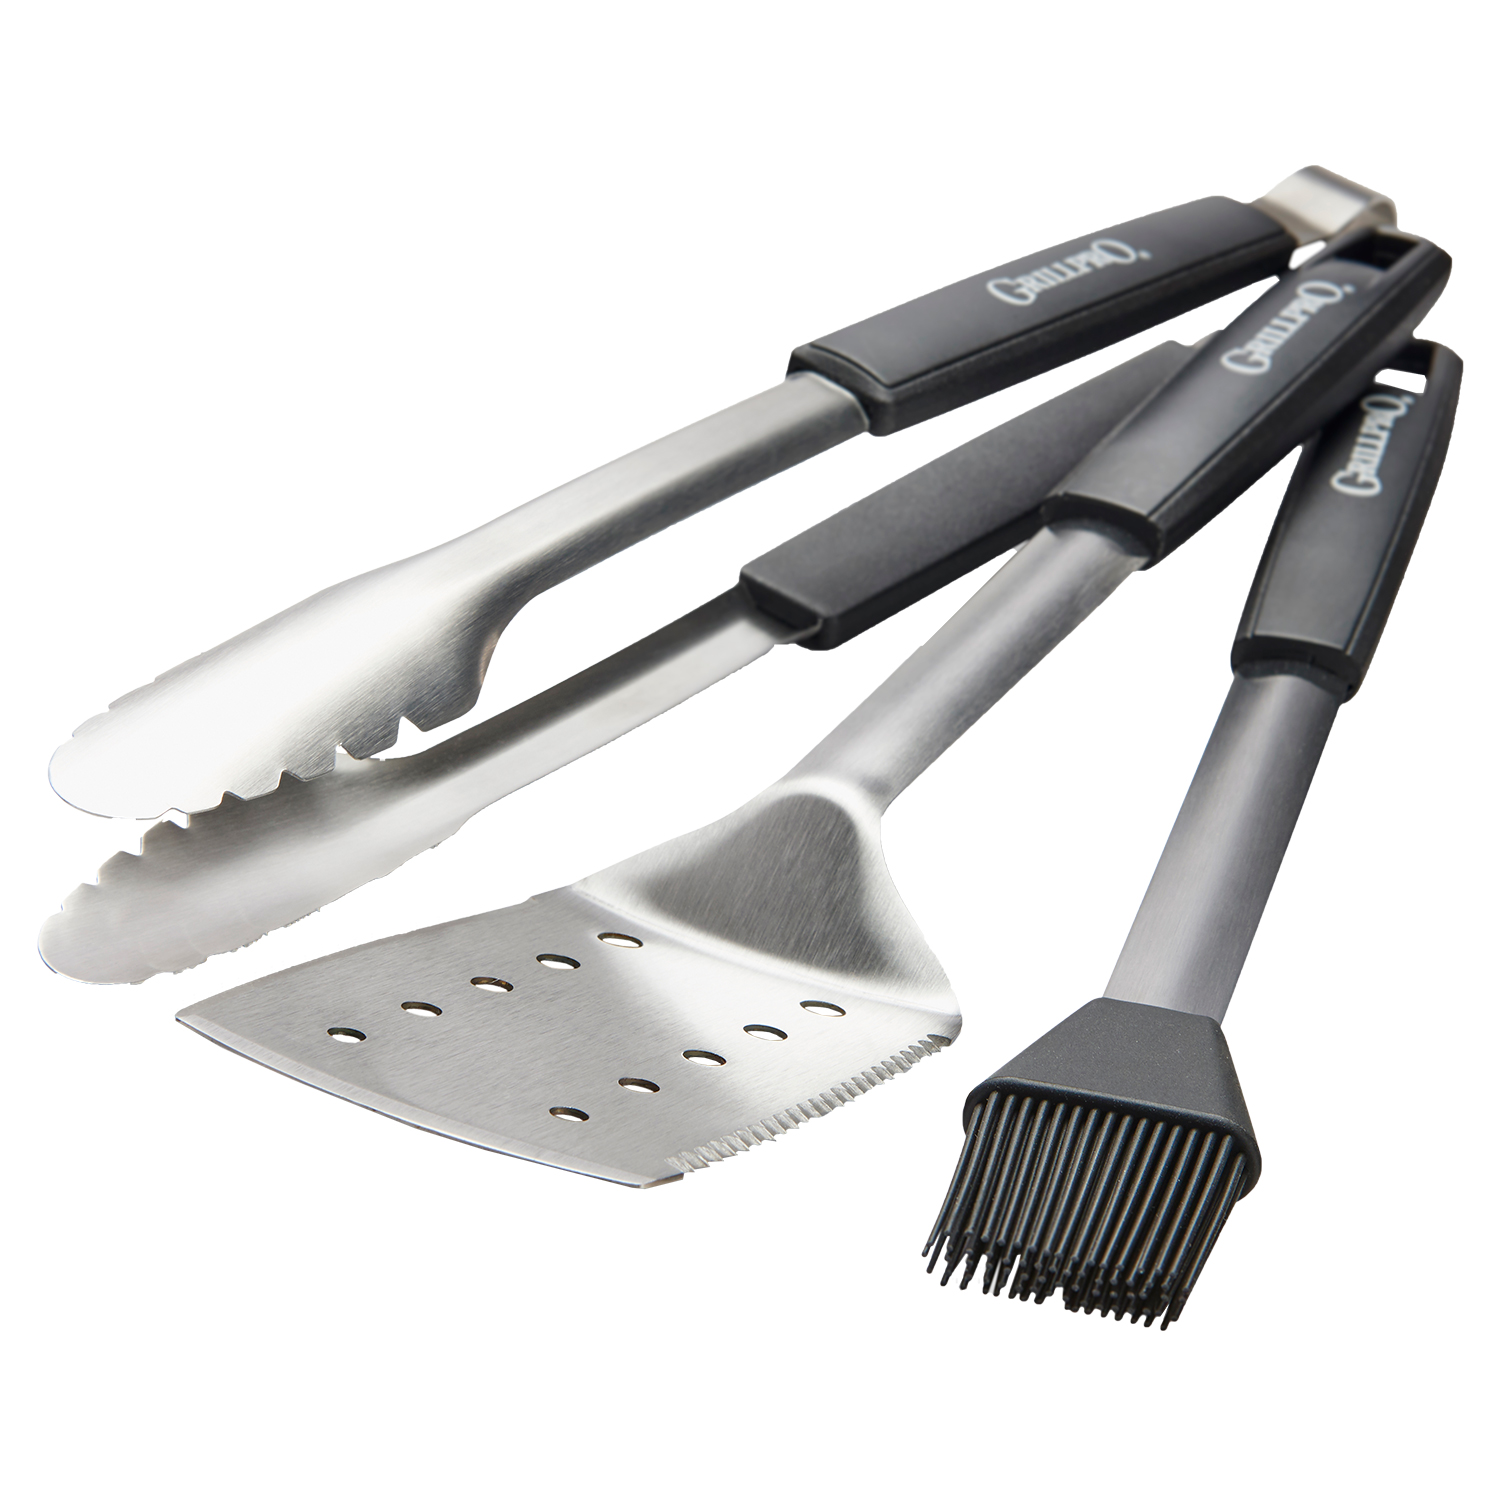 GrillPro - Deluxe stainless steel BBQ tool set - 3 pcs